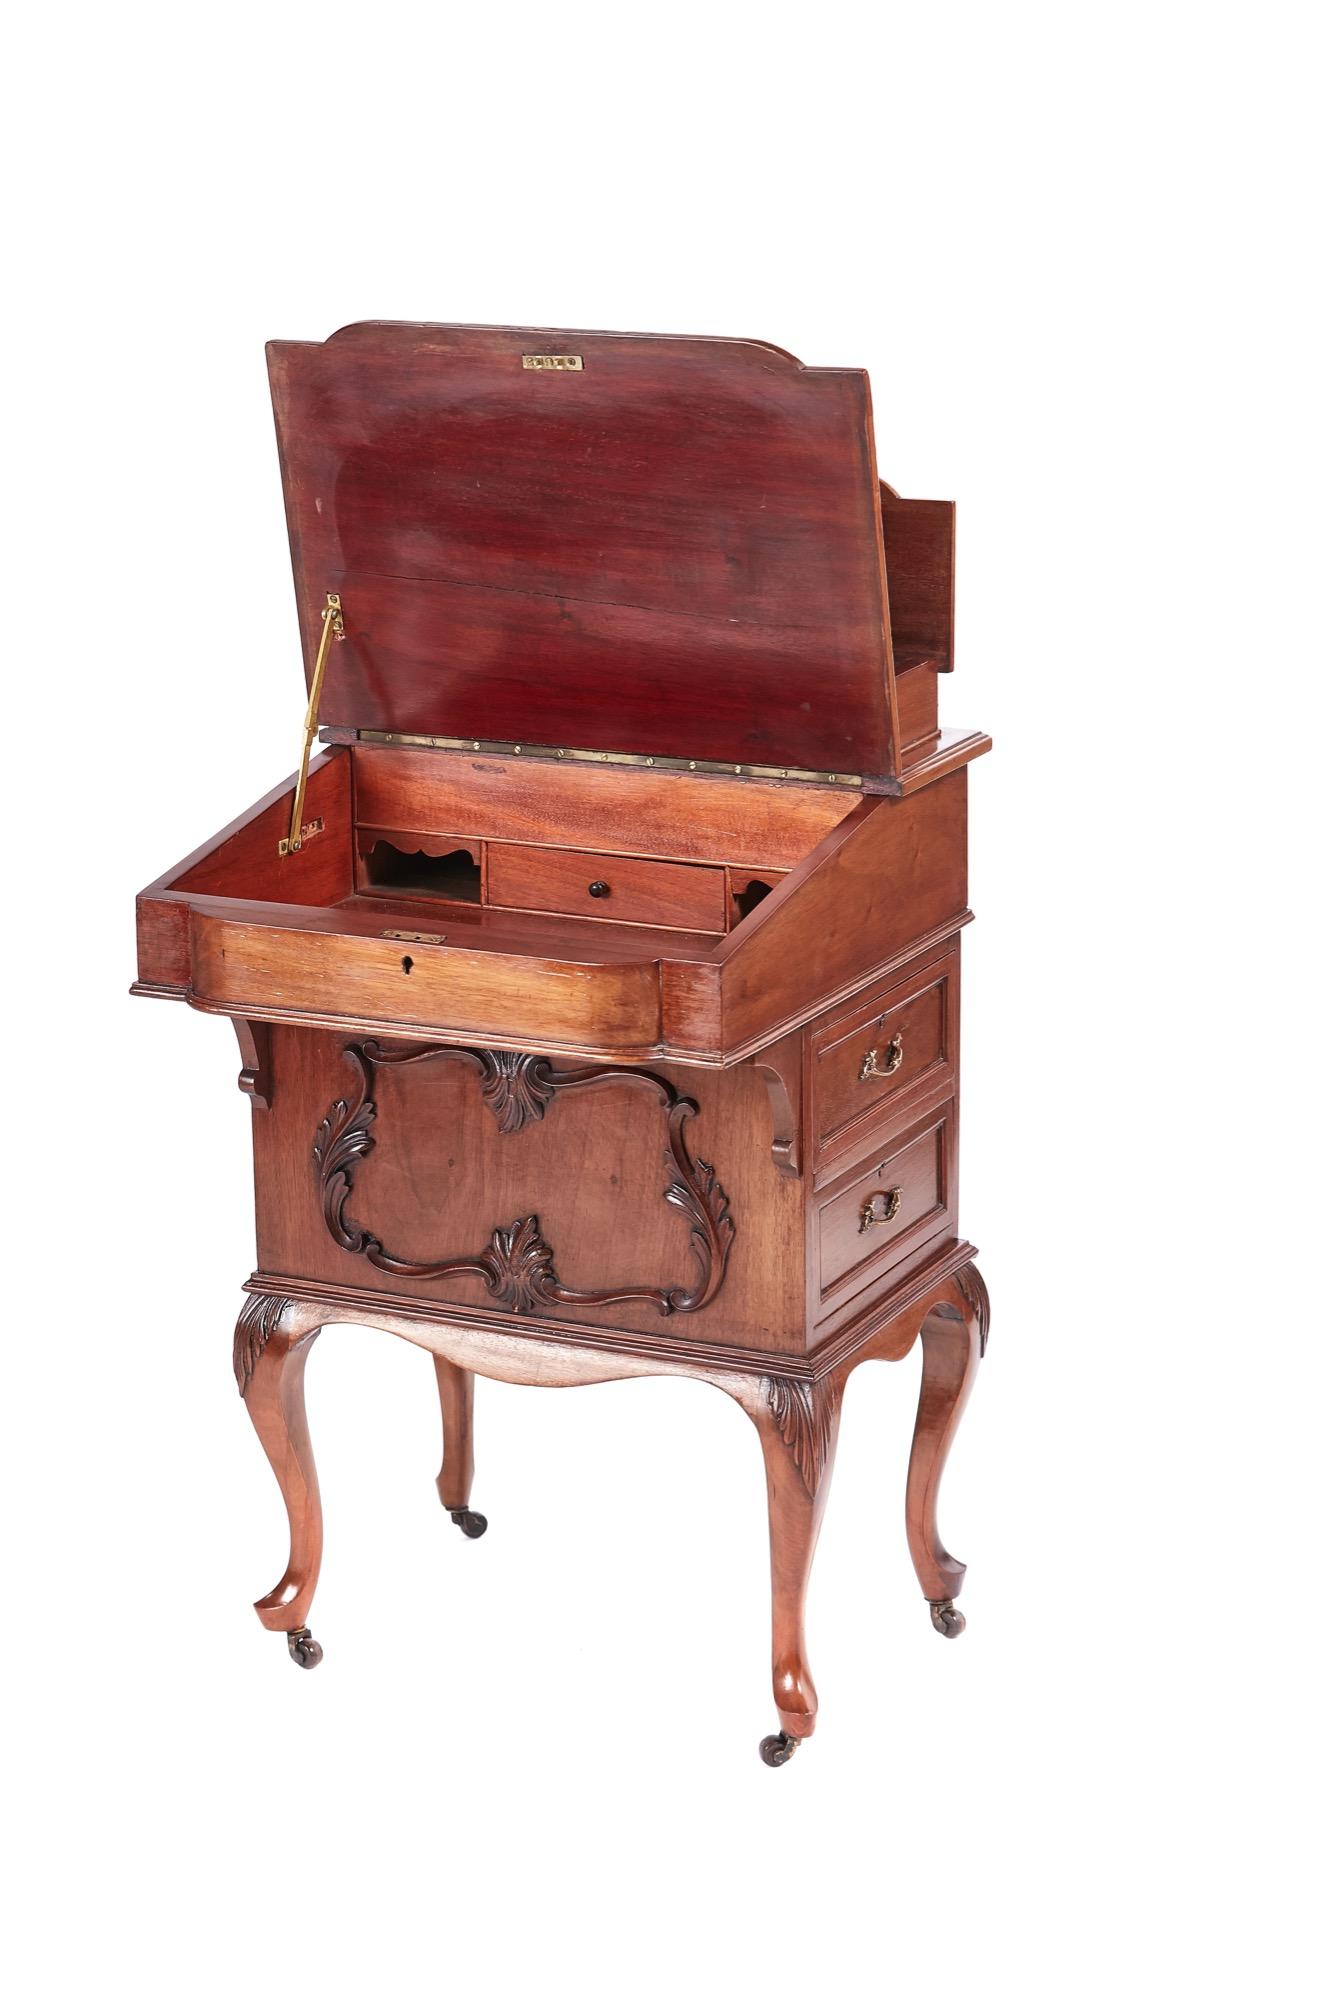 Antique Victorian freestanding walnut davenport having a lift up lid with fitted interior, shaped writing surface, elegantly carved front. Two drawers to the right hand side with original brass handles. Two false drawers to the left side with